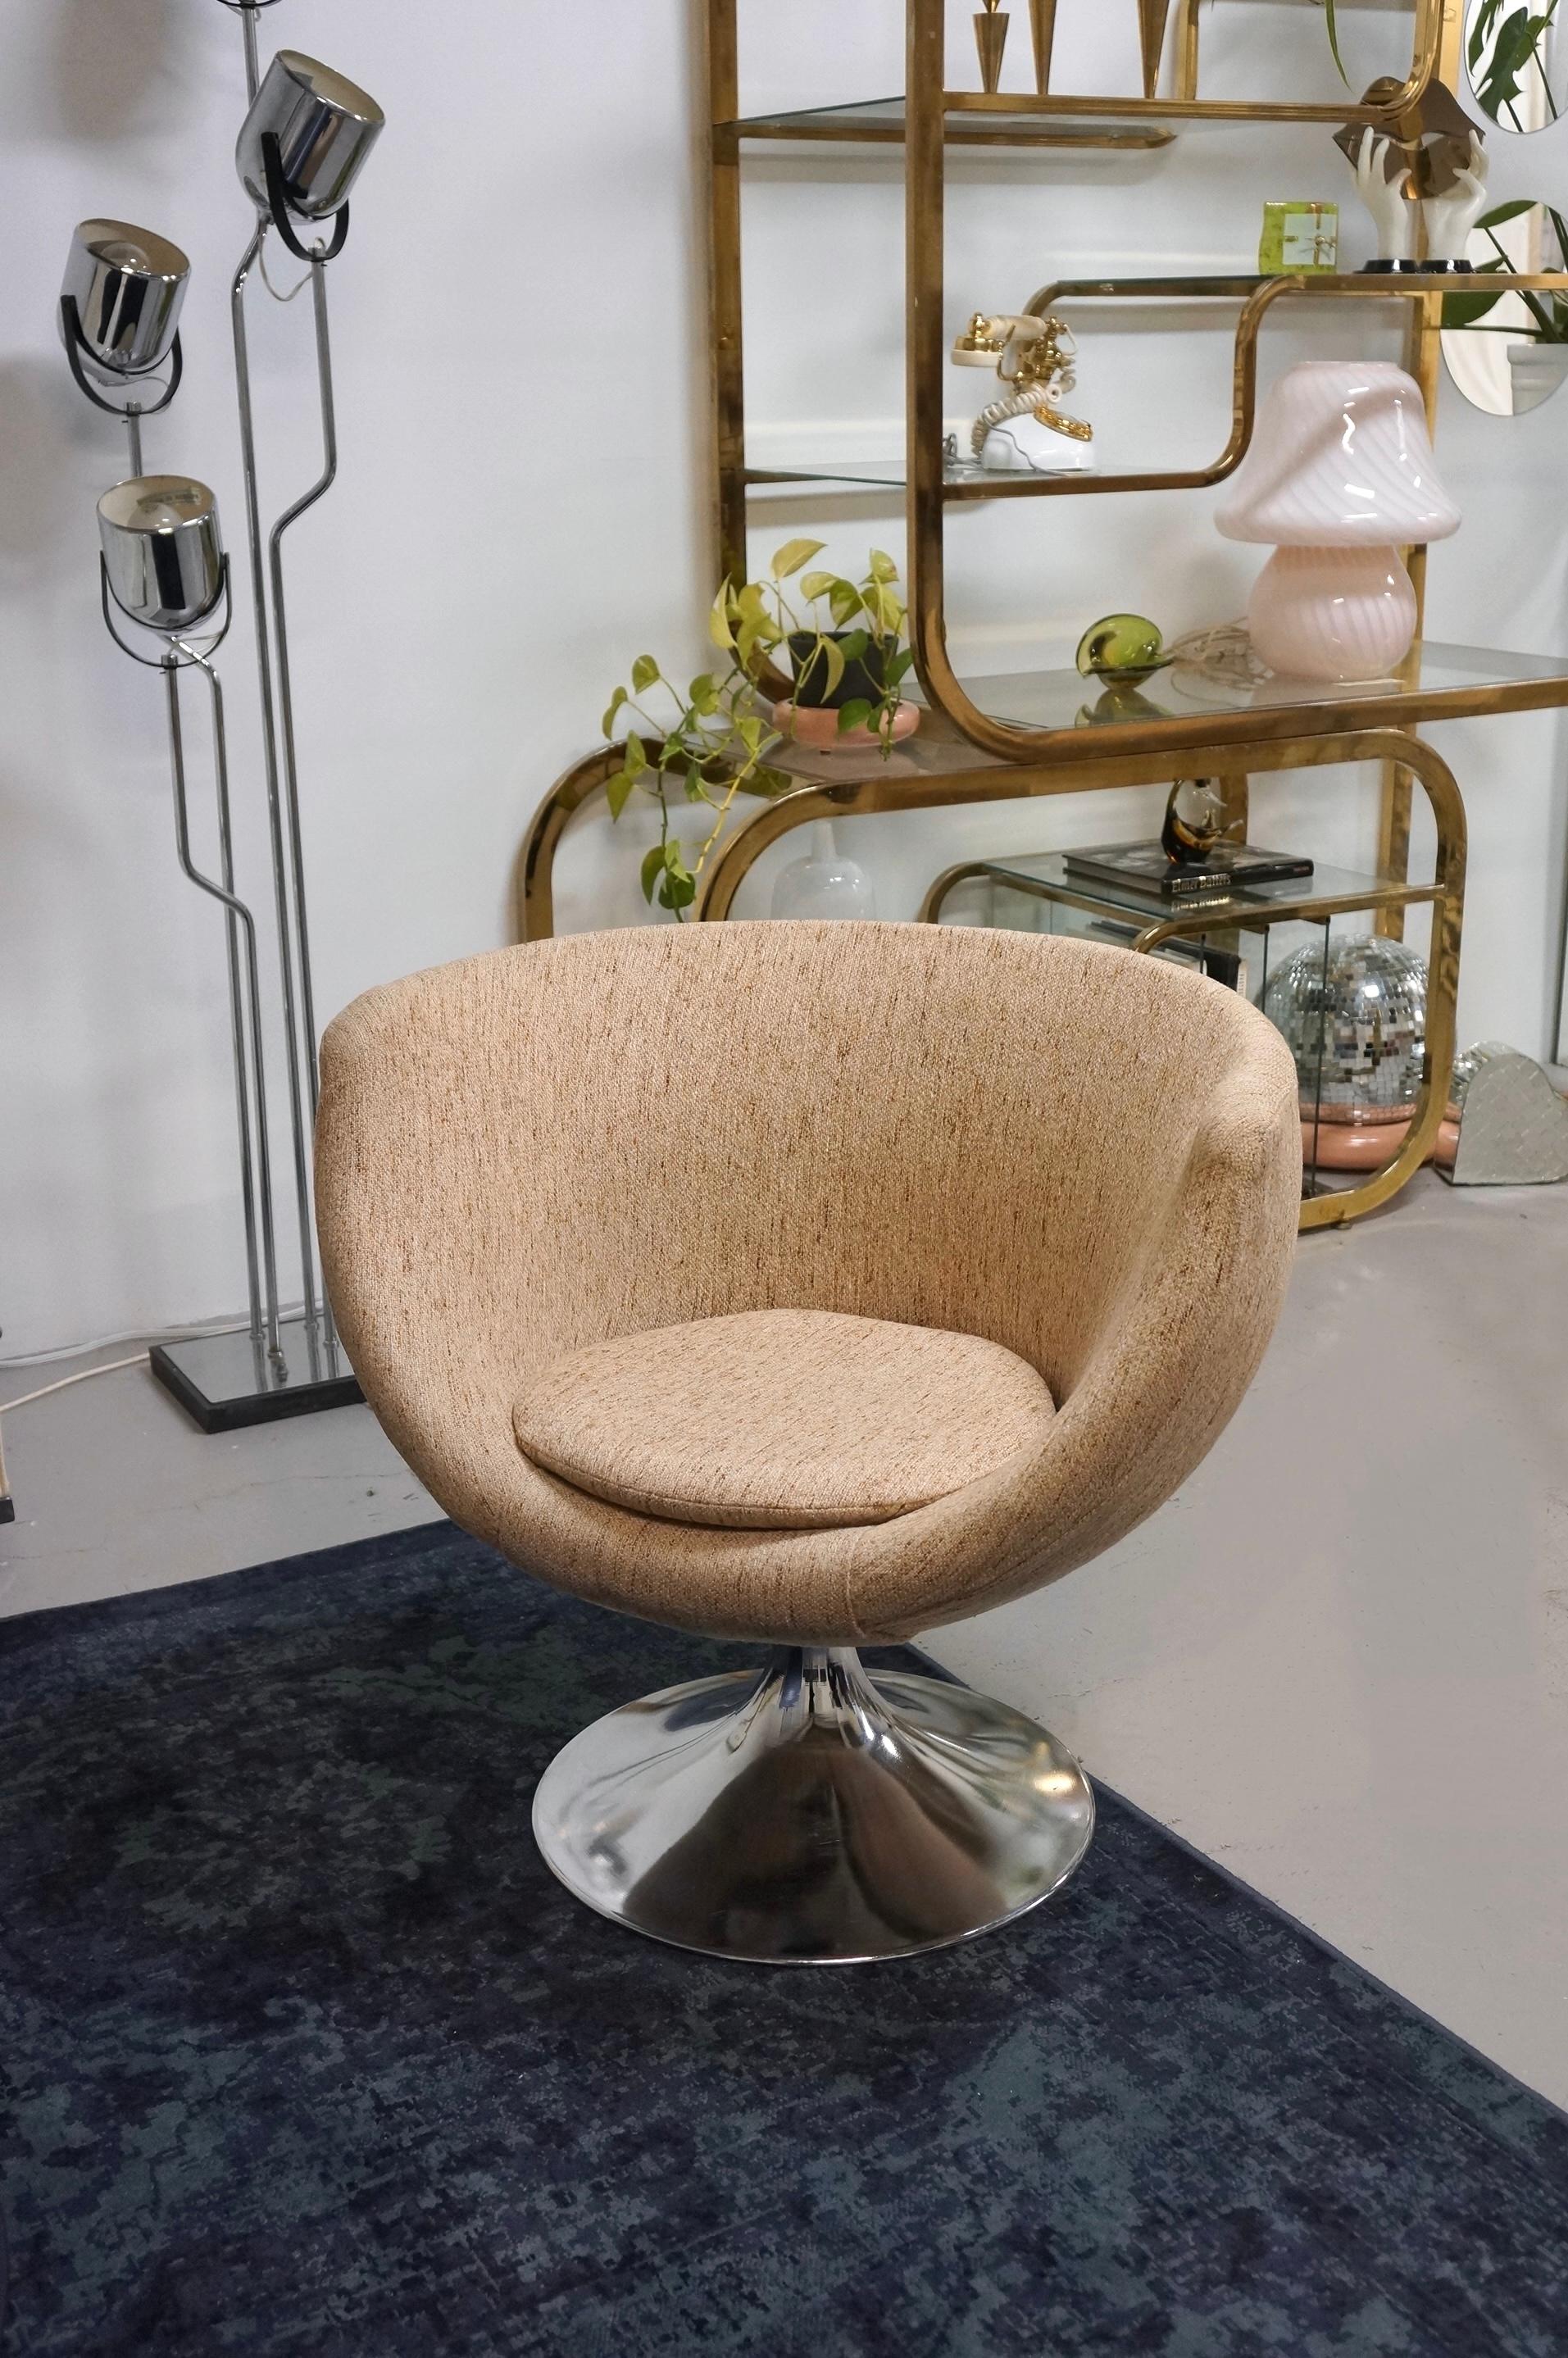 A stunning pod swivel chair in tweed fabric and chrome base. This spectacular lounge chair is attributed to Overman and made in the 1960s. The fabric is in tweed and in warm and neutral tone. The base is a chrome aluminum in a tulip shape. The